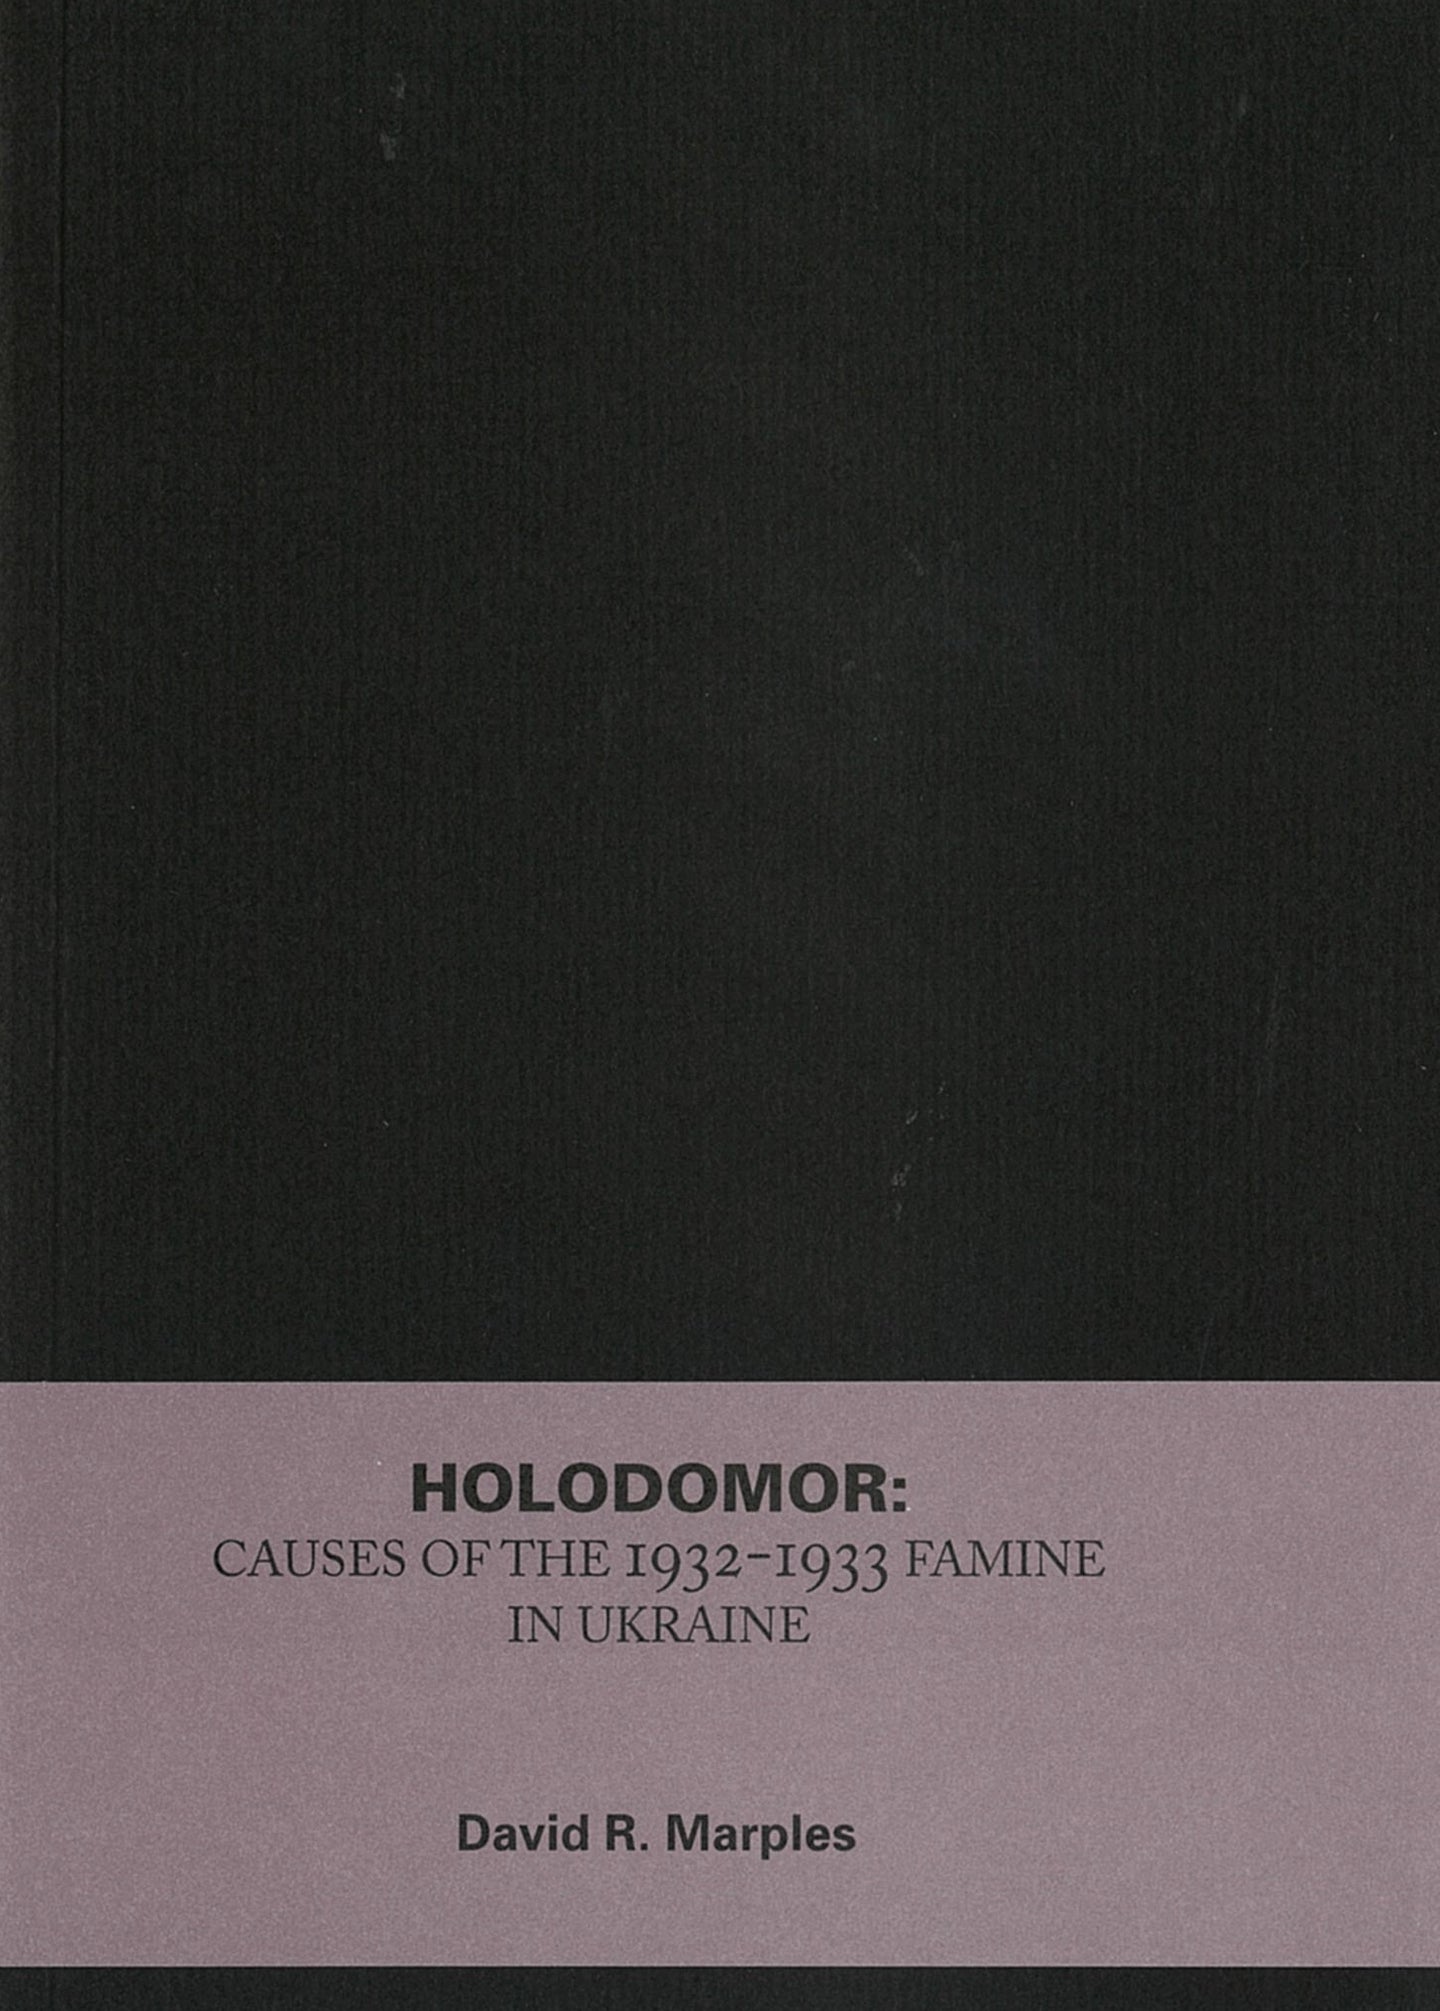 Holodomor:Causes of the 1932-1933 Famine in Ukraine